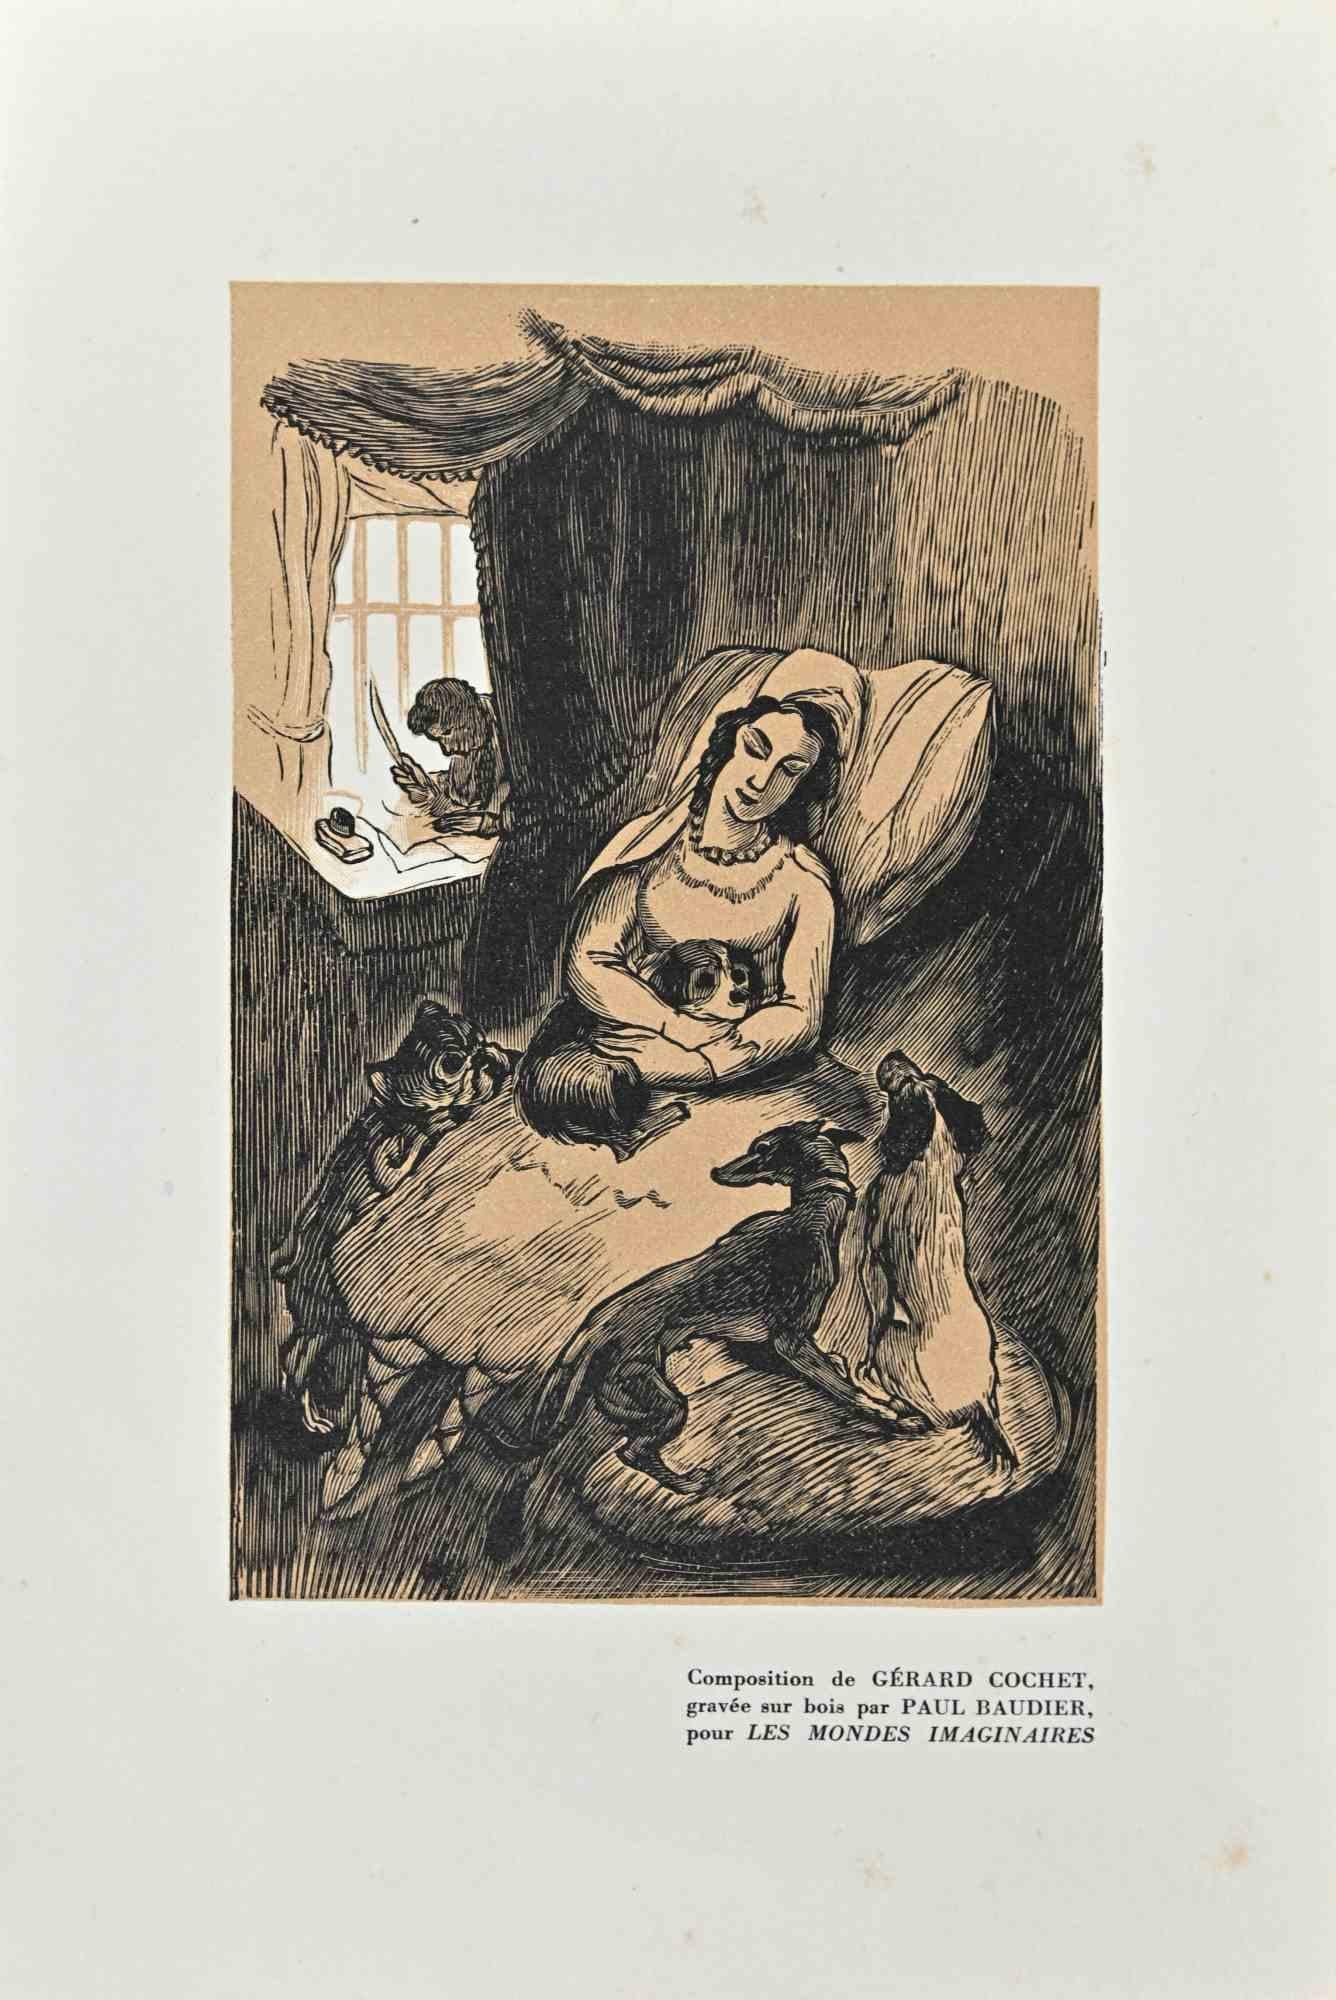 The Imagination is an original woodcut print on ivory-colored paper realized by Paul Baudier (1881-1962) in the 1930s.

On the lower right description in French.

Very good conditions.

Paul Baudier, (born October 18, 1881 in Paris and died December